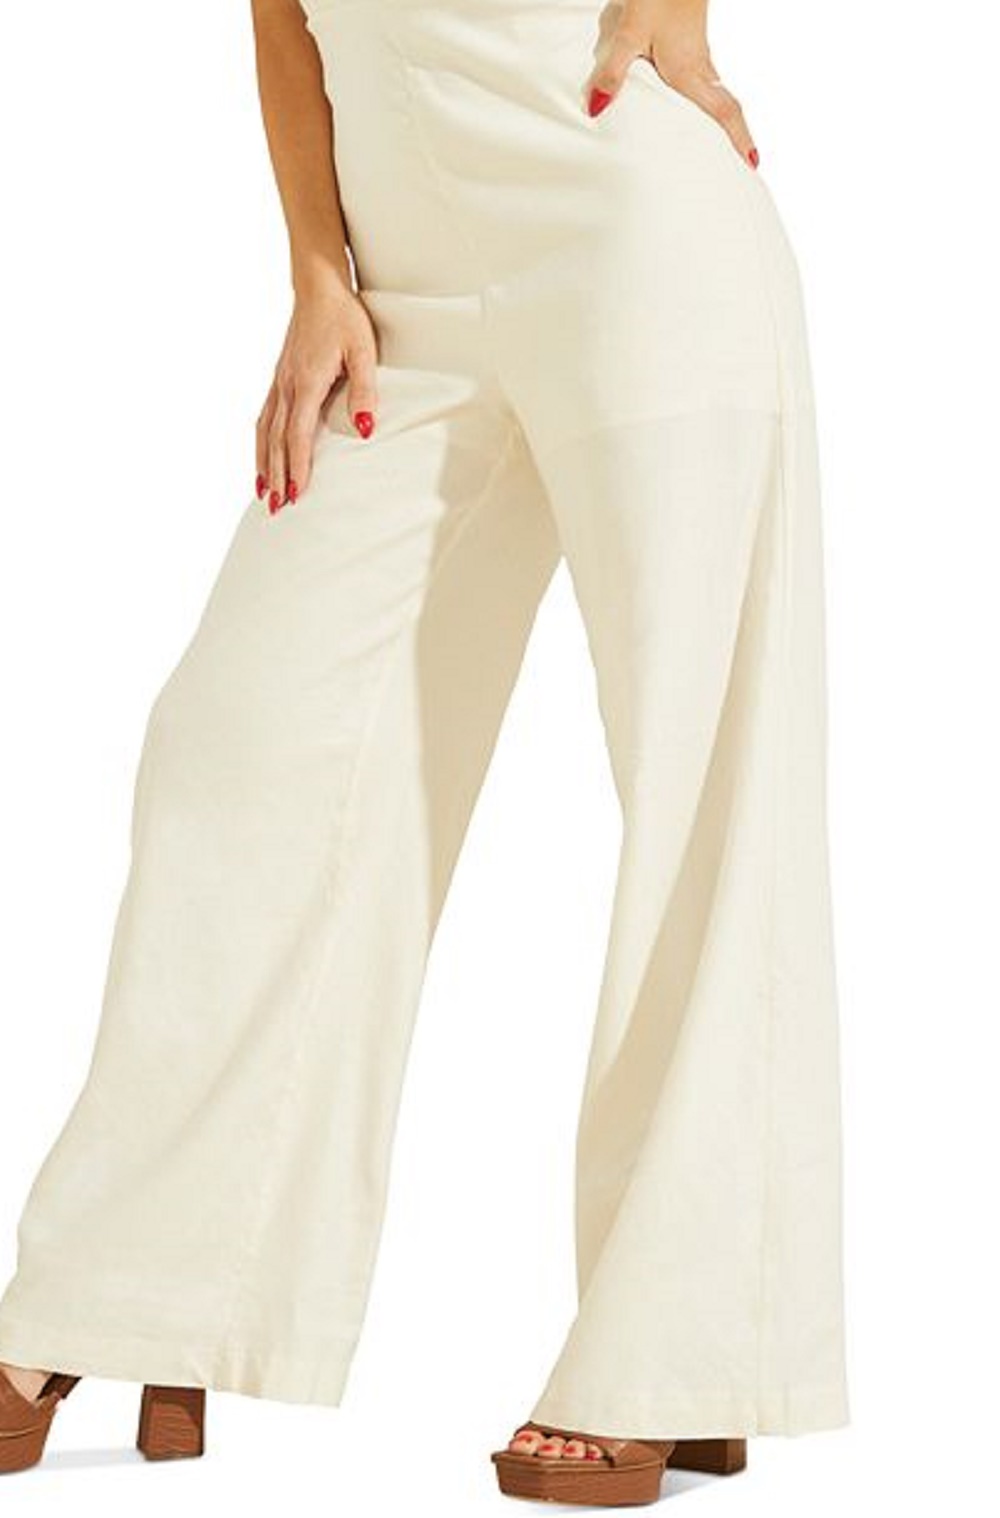 GUESS Women's Kora Backless Jumpsuit White Size 10